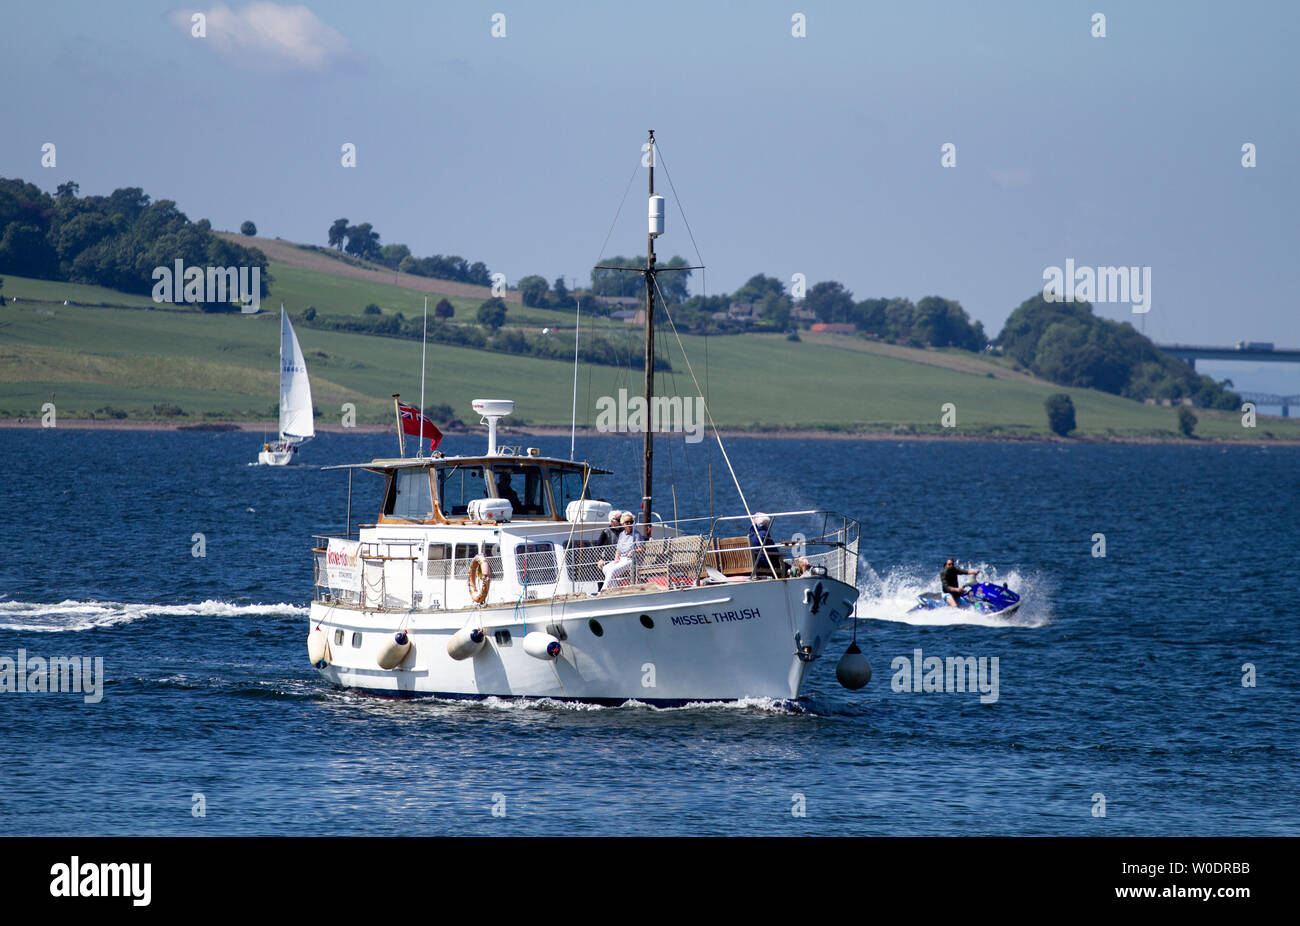 Dundee, Tayside, Scotland, UK. 27th June, 2019. UK weather: Sunny day with a very cool easterly breeze across Tayside. The River Tay leisure boat and Stock Photo